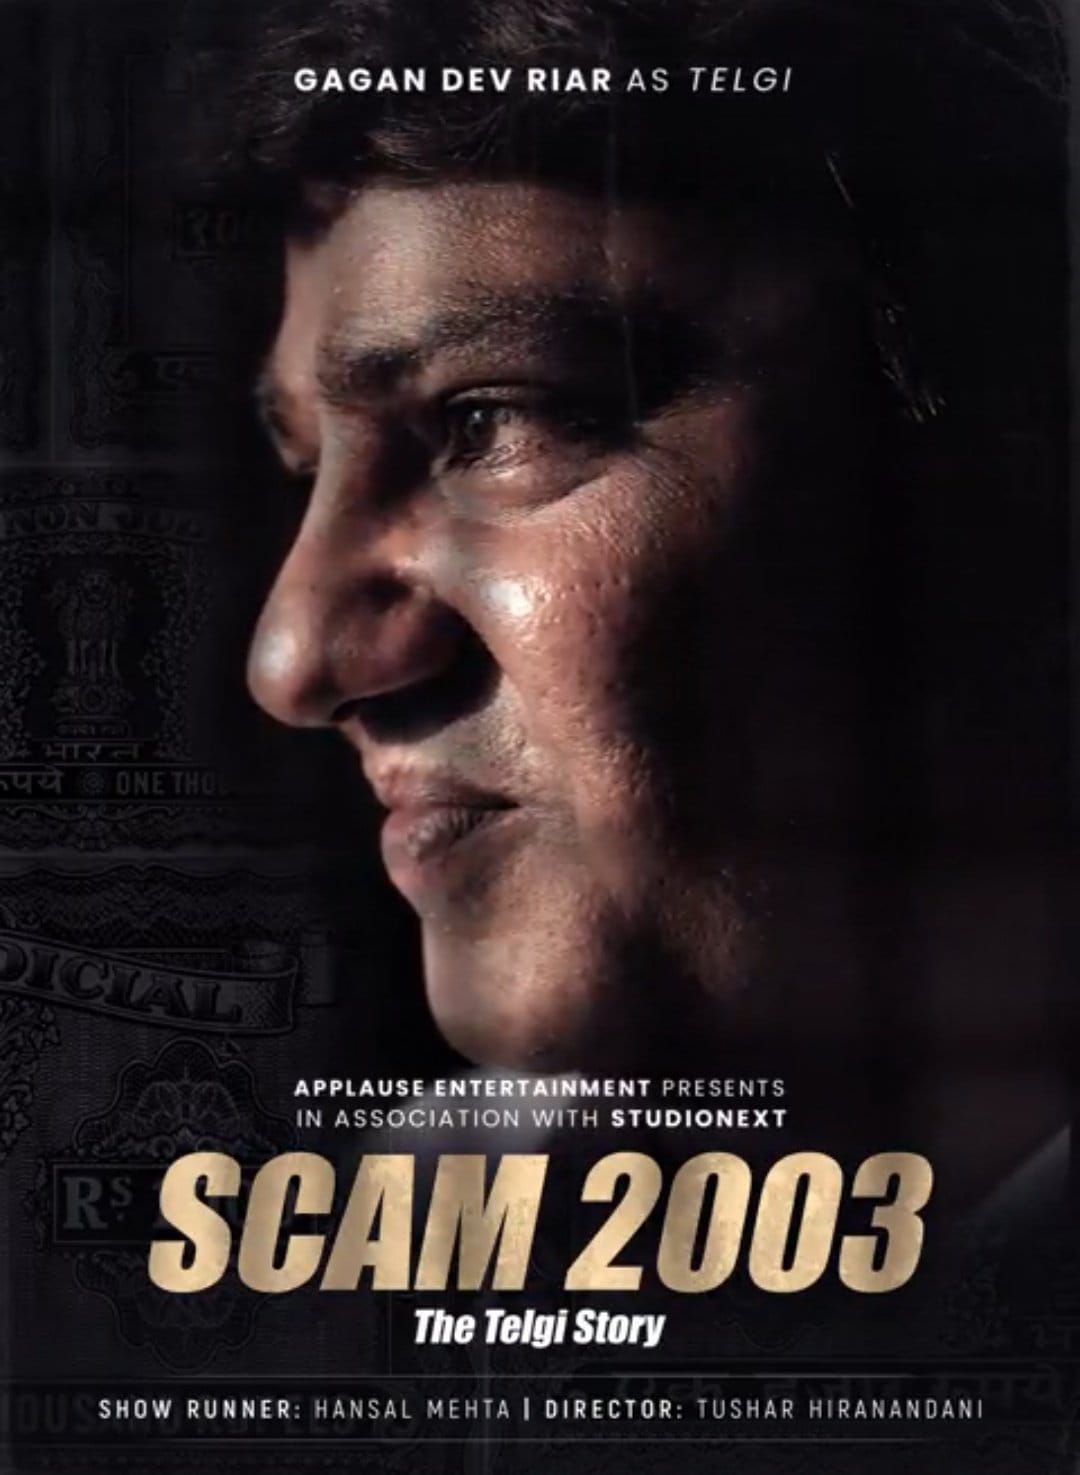 Scam 2003 The Telgi Story Web Series Poster